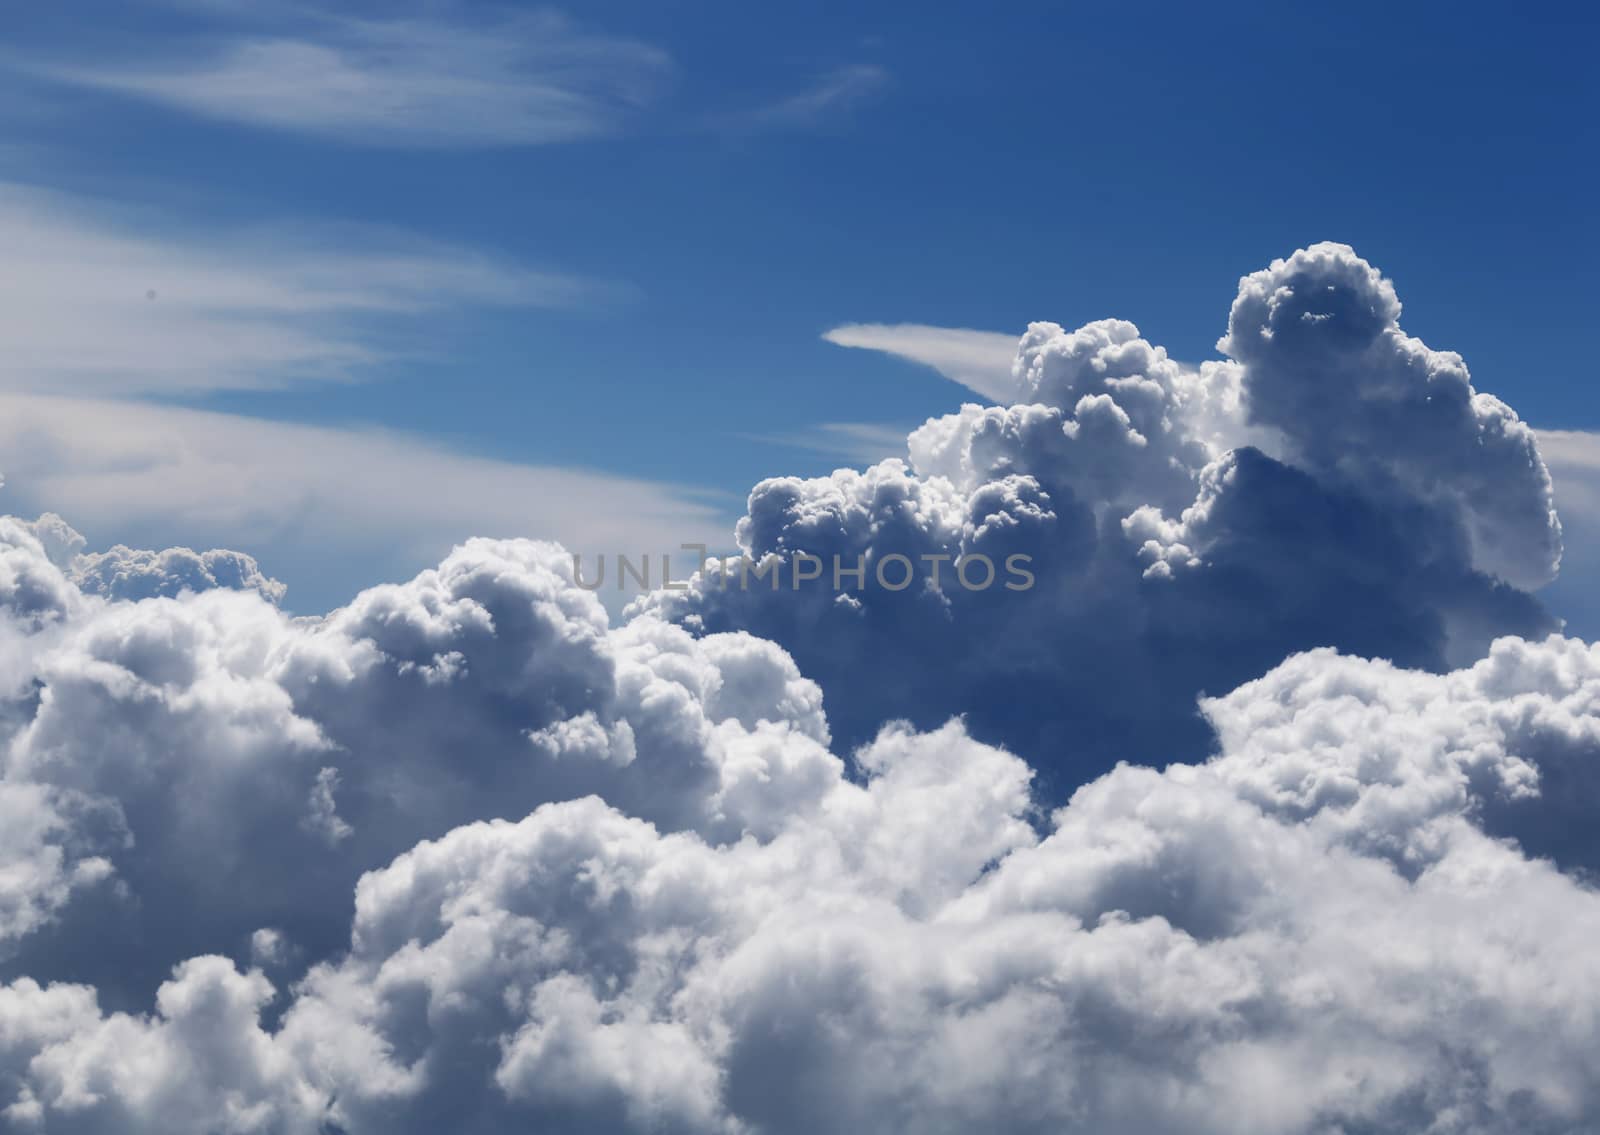 Clouds by Carratera